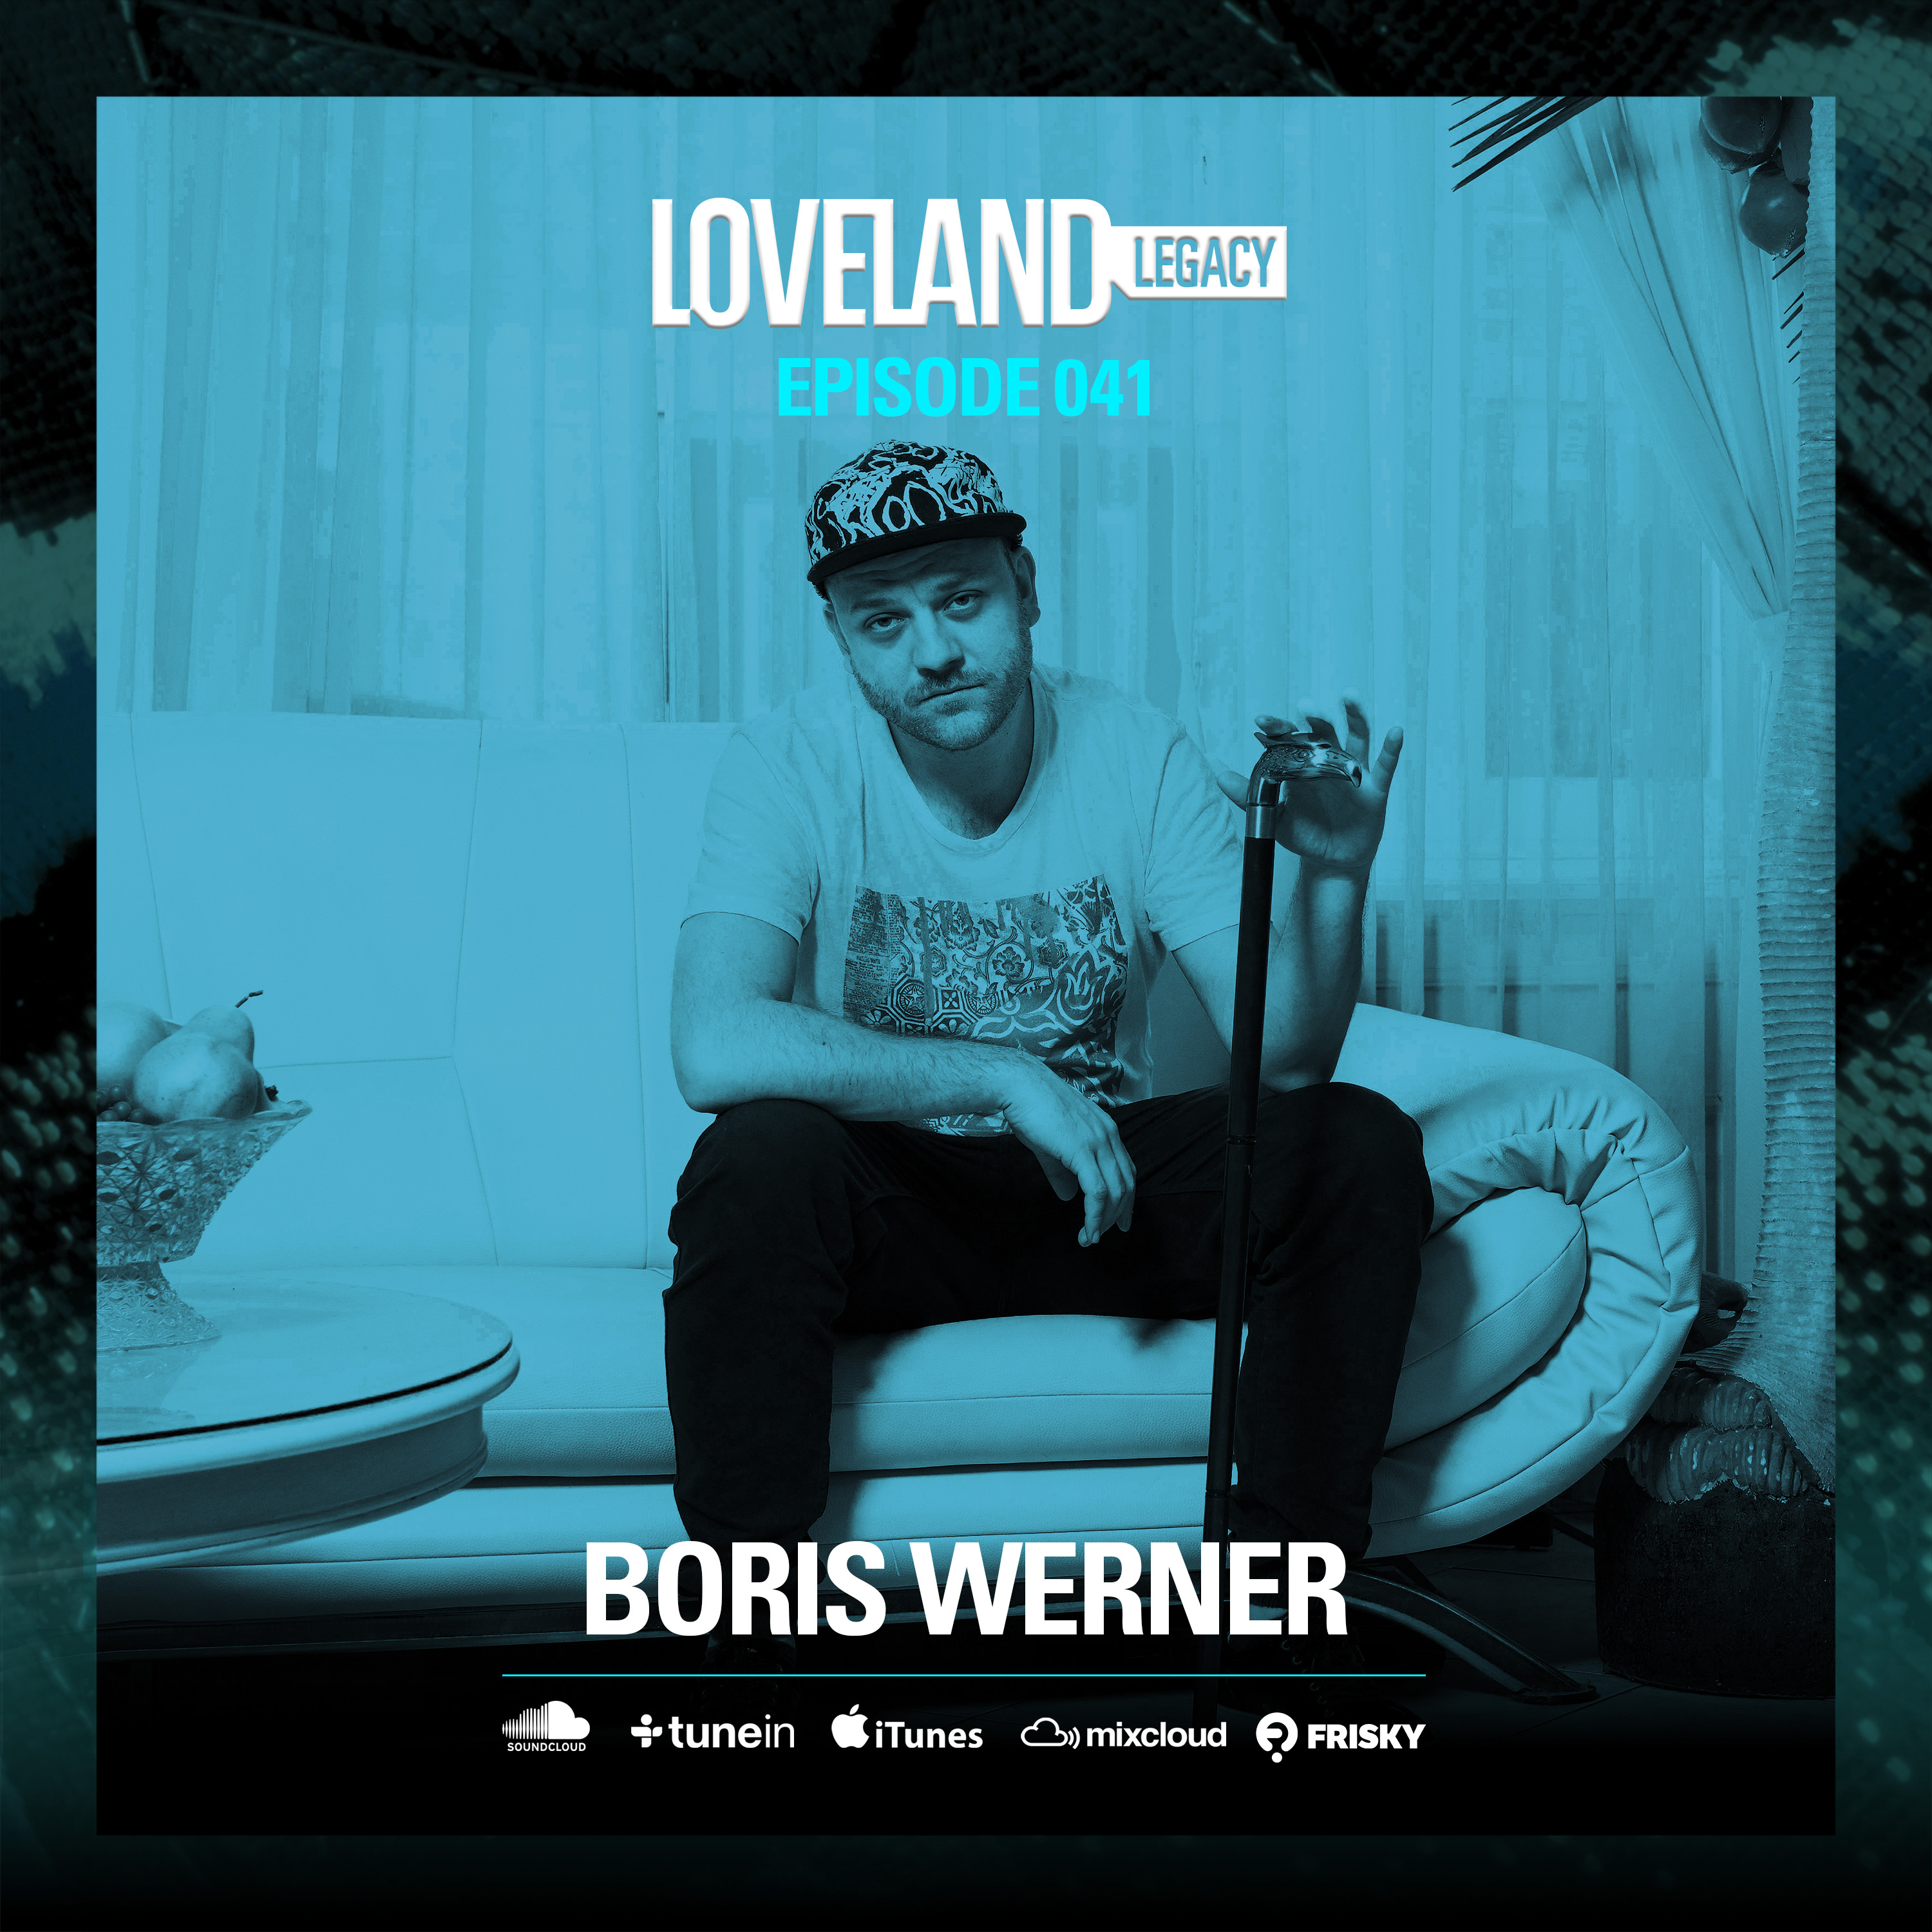 This week we have the longest Loveland Legacy episode to date lined up for you. Listen to Boris Werner pump out track after track of quality house for 5,5 hours in episode 41 of Loveland Legacy! Like what you hear? Then make sure to check Boris' set @ Circo Loco at Loveland ADE October 22nd. Afterlife at Loveland ADE | October 20th 2016 bit.ly/AfterlifeADE2016 ENTER. presents EXPERIENCES. at Loveland ADE | October 21st 2016 bit.ly/EnterADE2016 Circoloco at Loveland ADE | October 22nd 2016 bit.ly/CircolocoADE2016